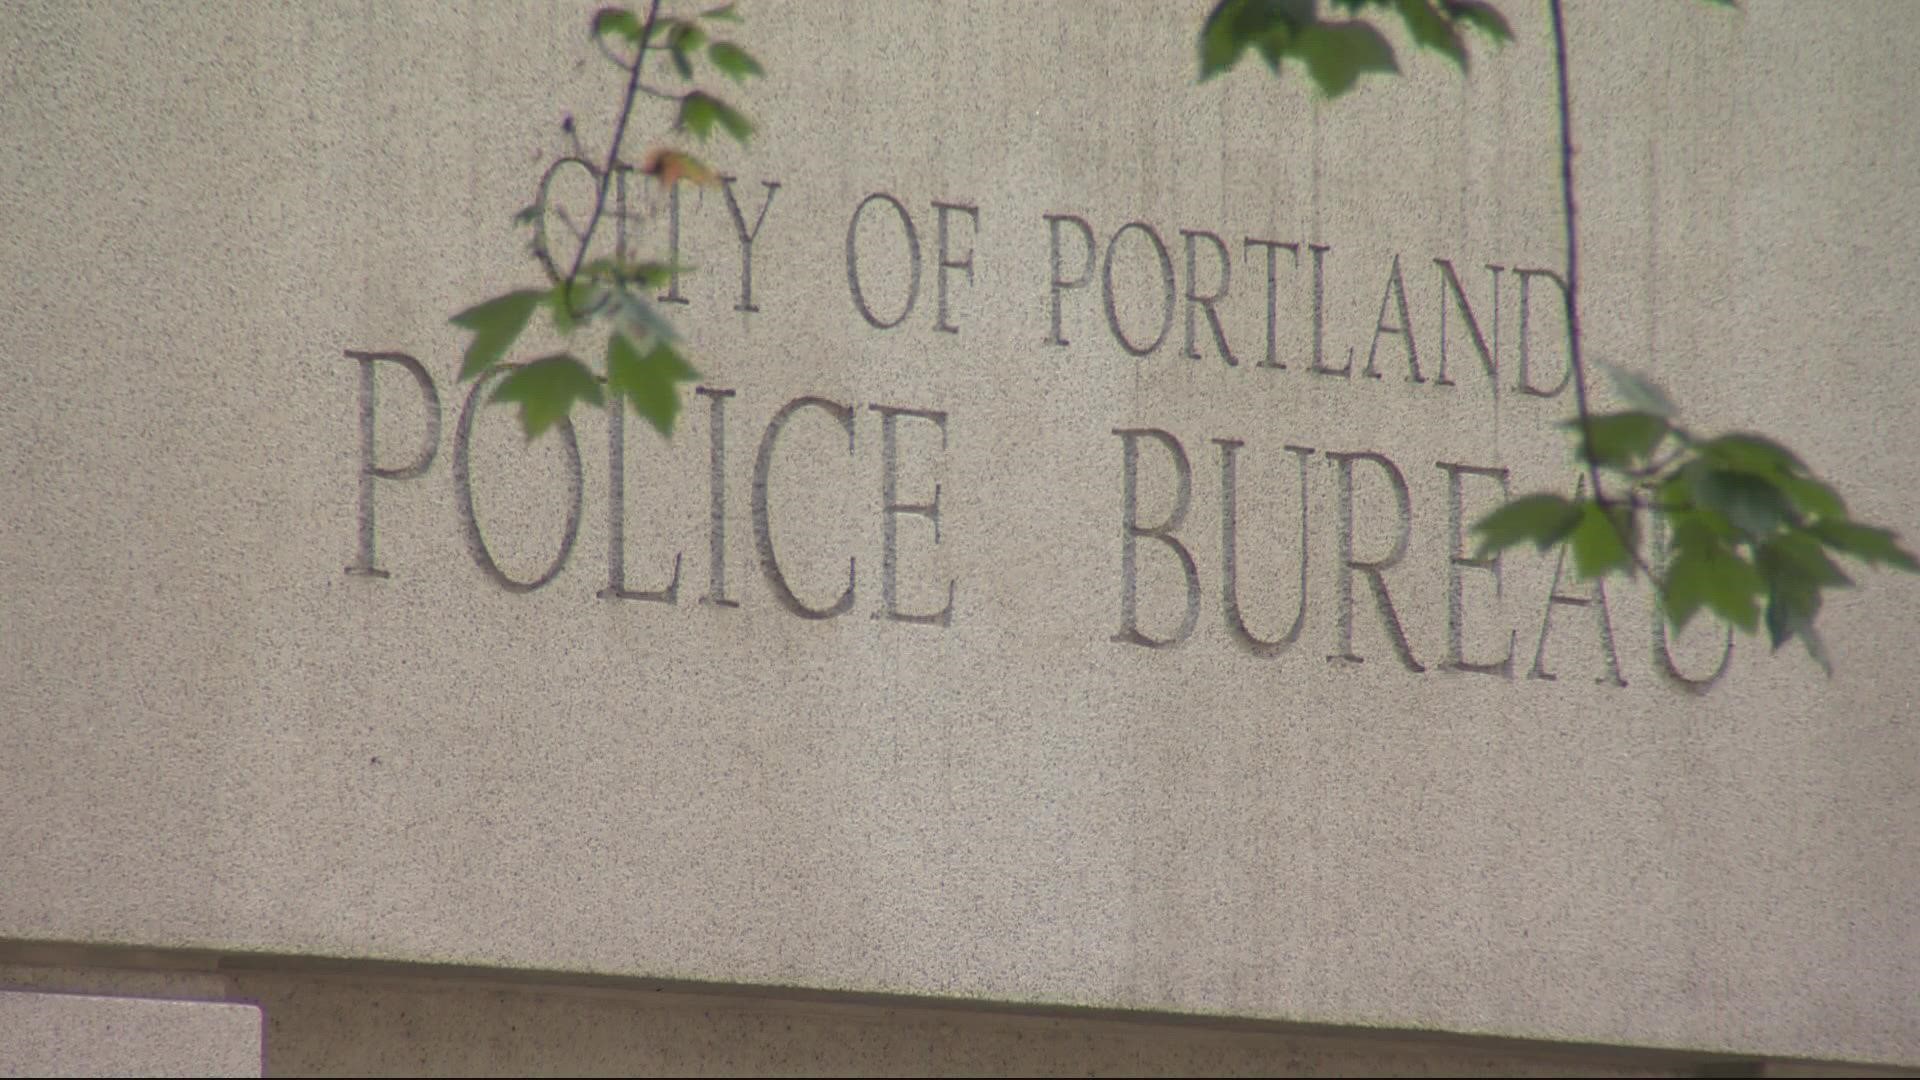 Amid staffing challenges, the Portland Police Bureau is ramping up efforts to hire more officers.